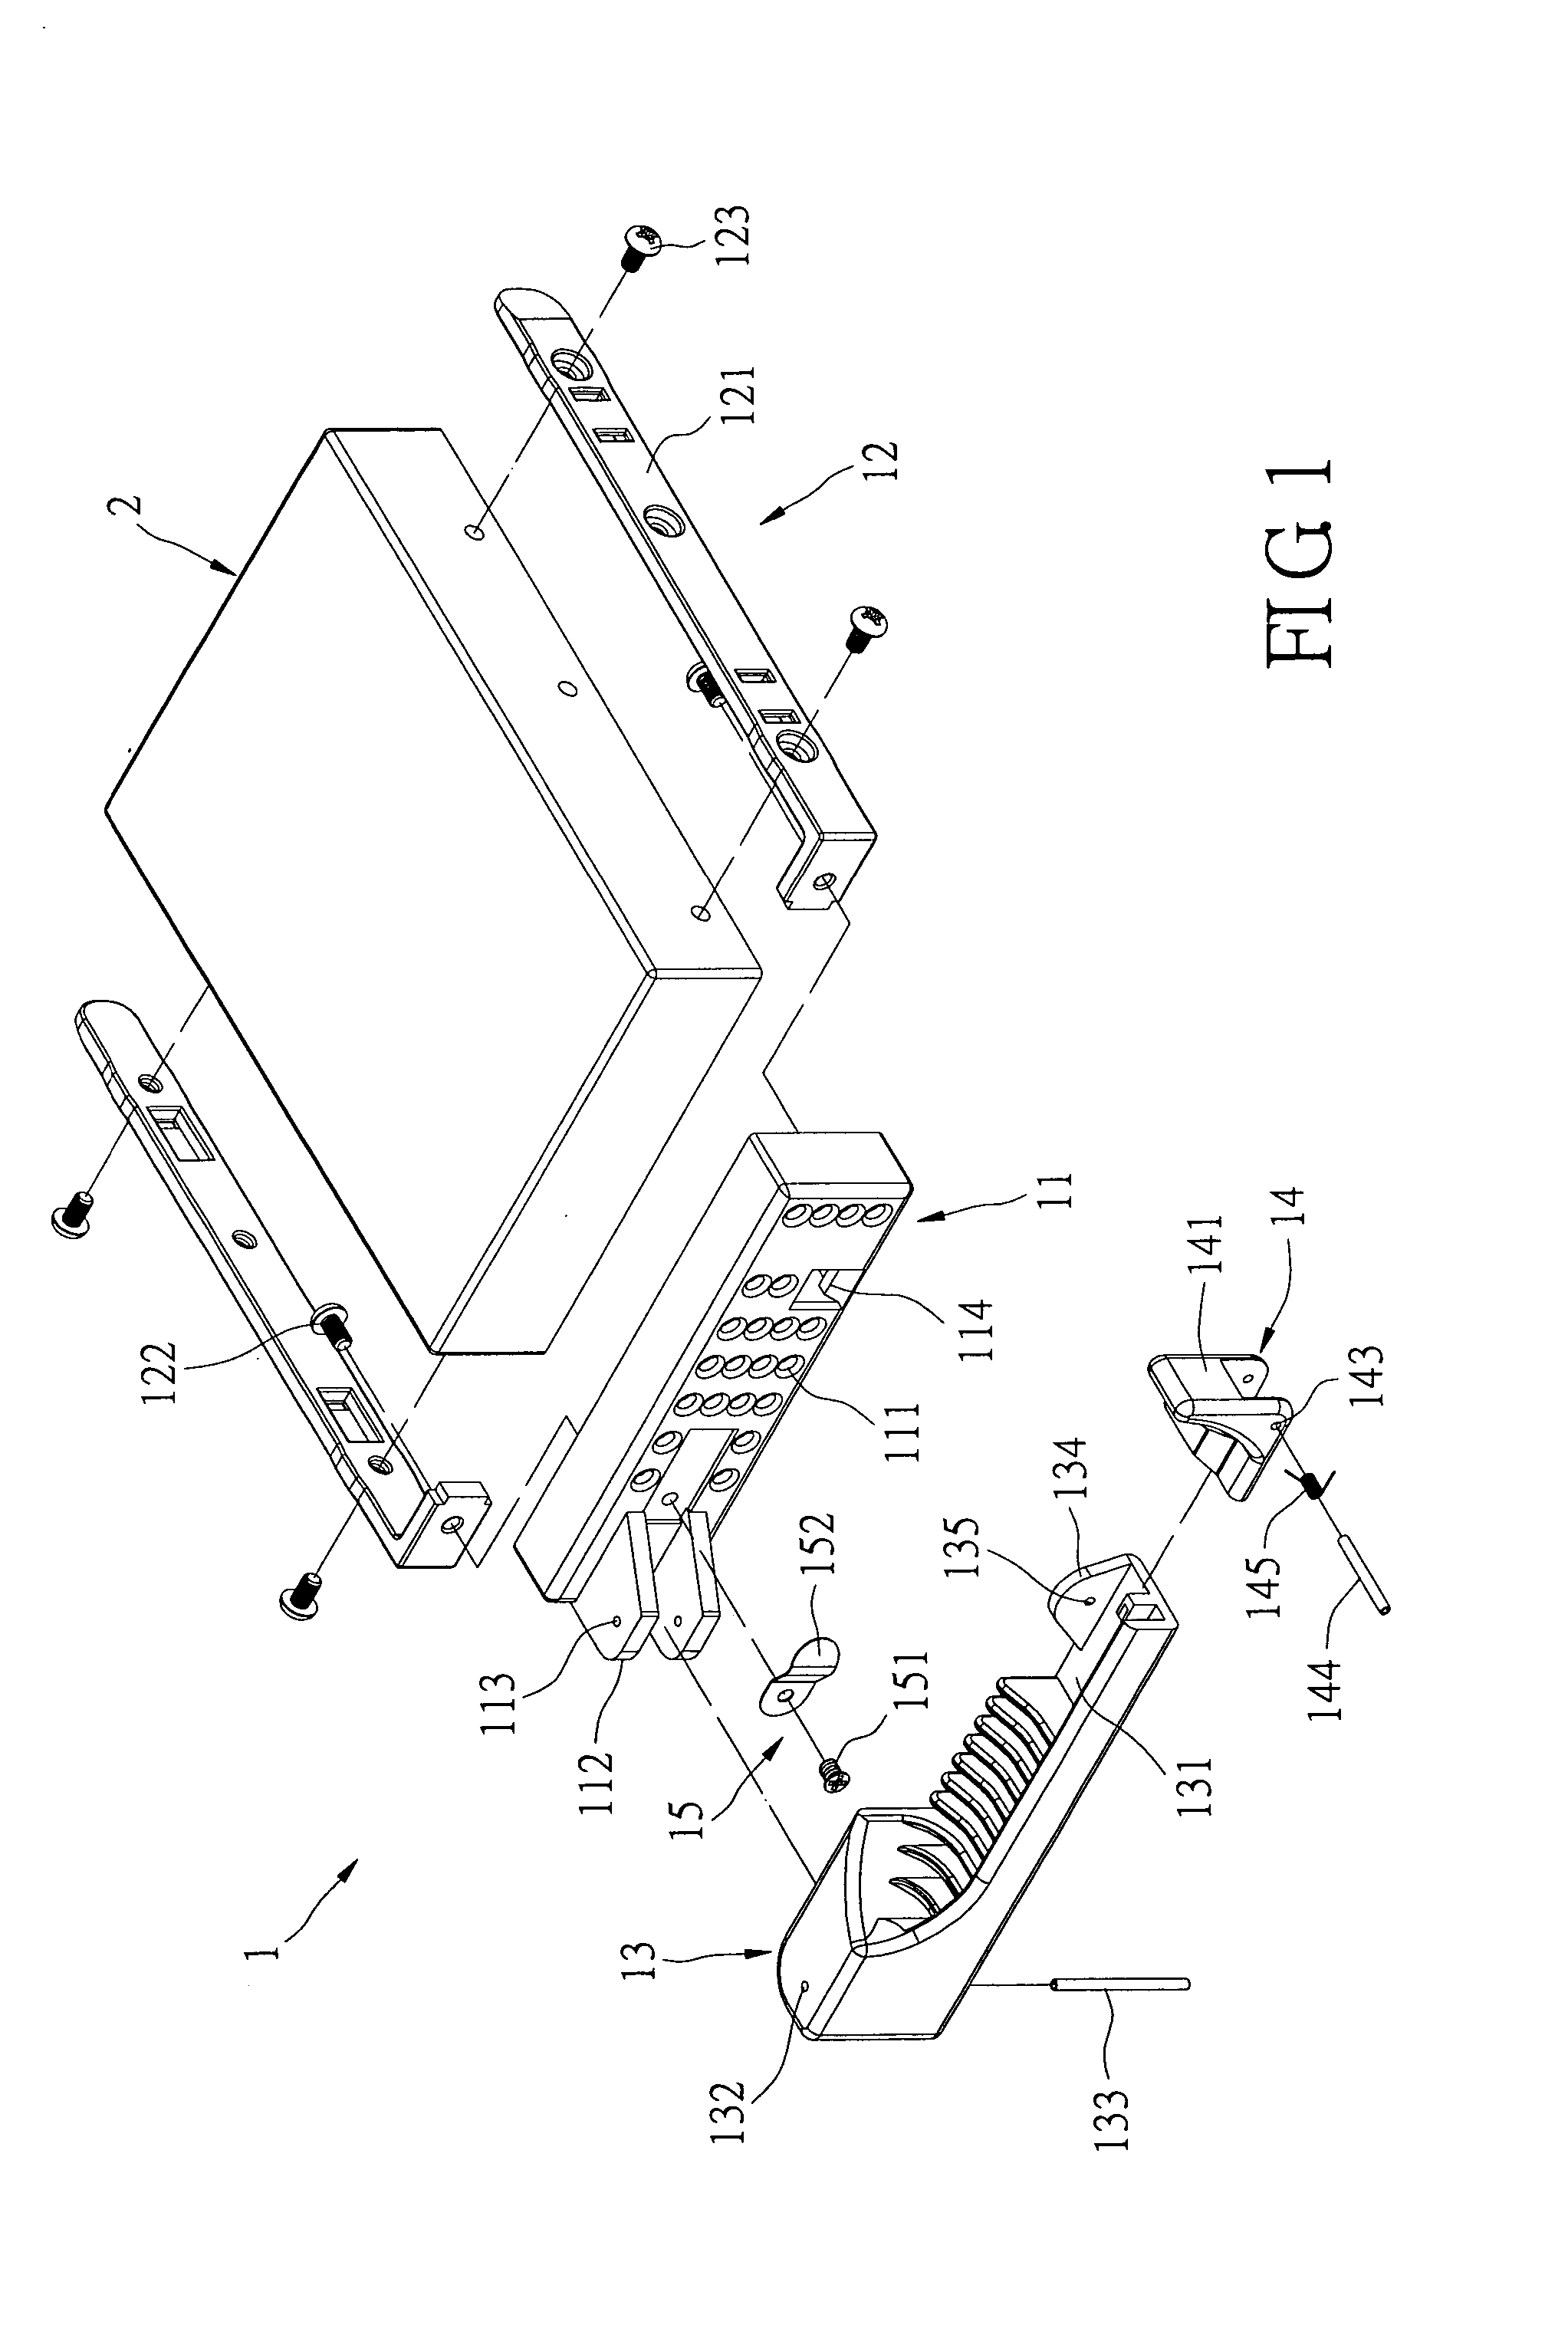 Removable hard disk housing assembly